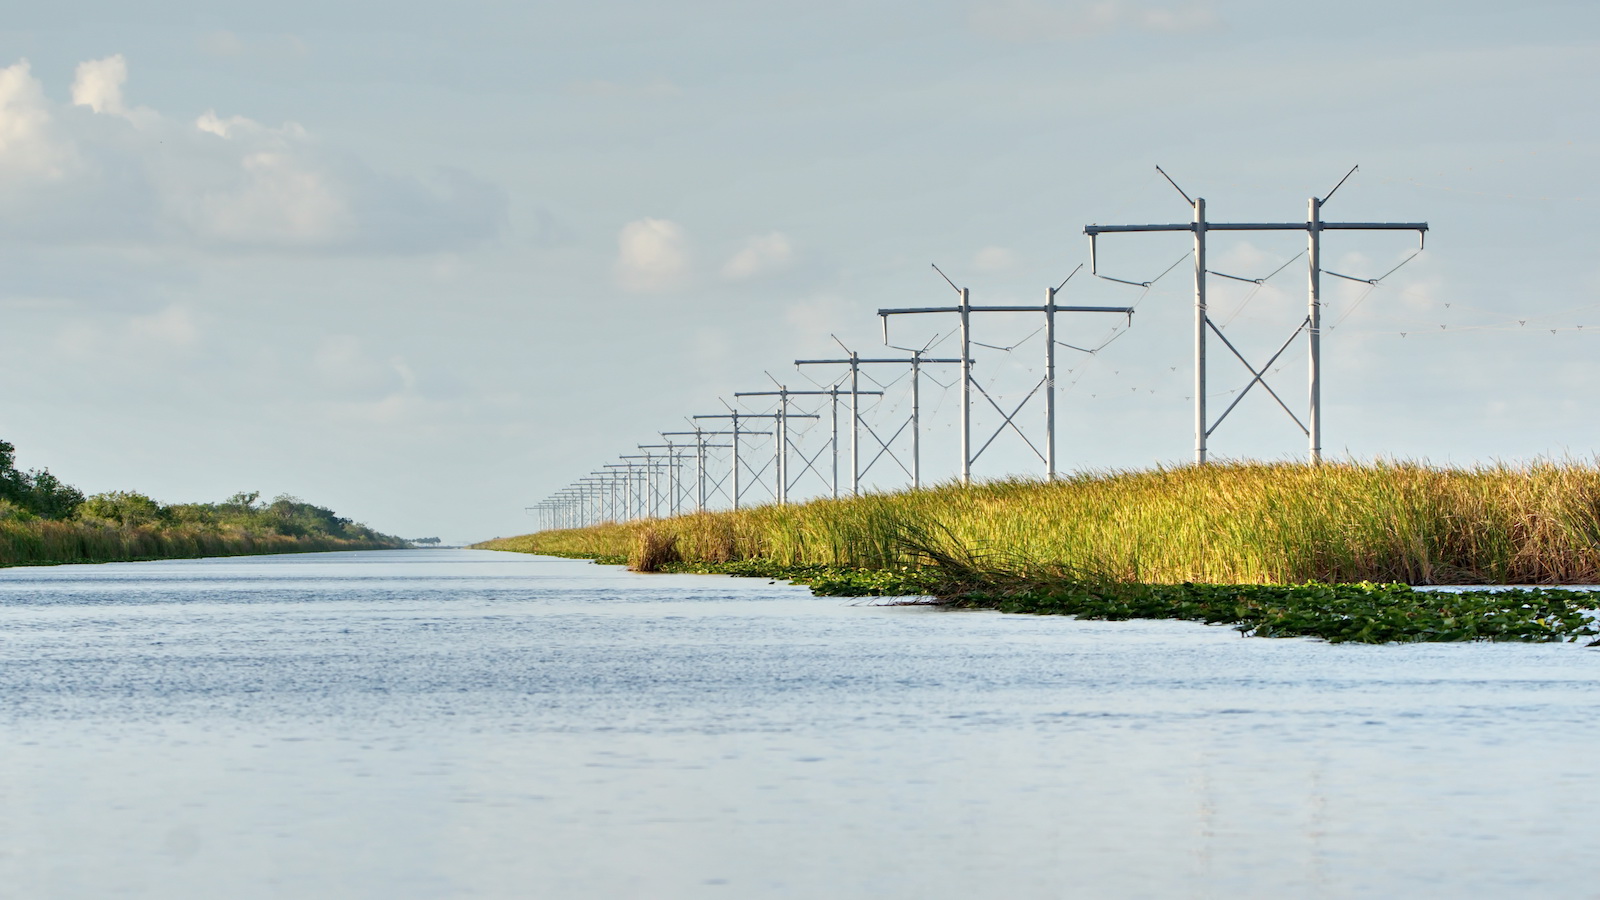 a photo of the Florida everglades with a wide expanse of blue, calm waters on the left, and a series of crisscrossing power lines on the right.